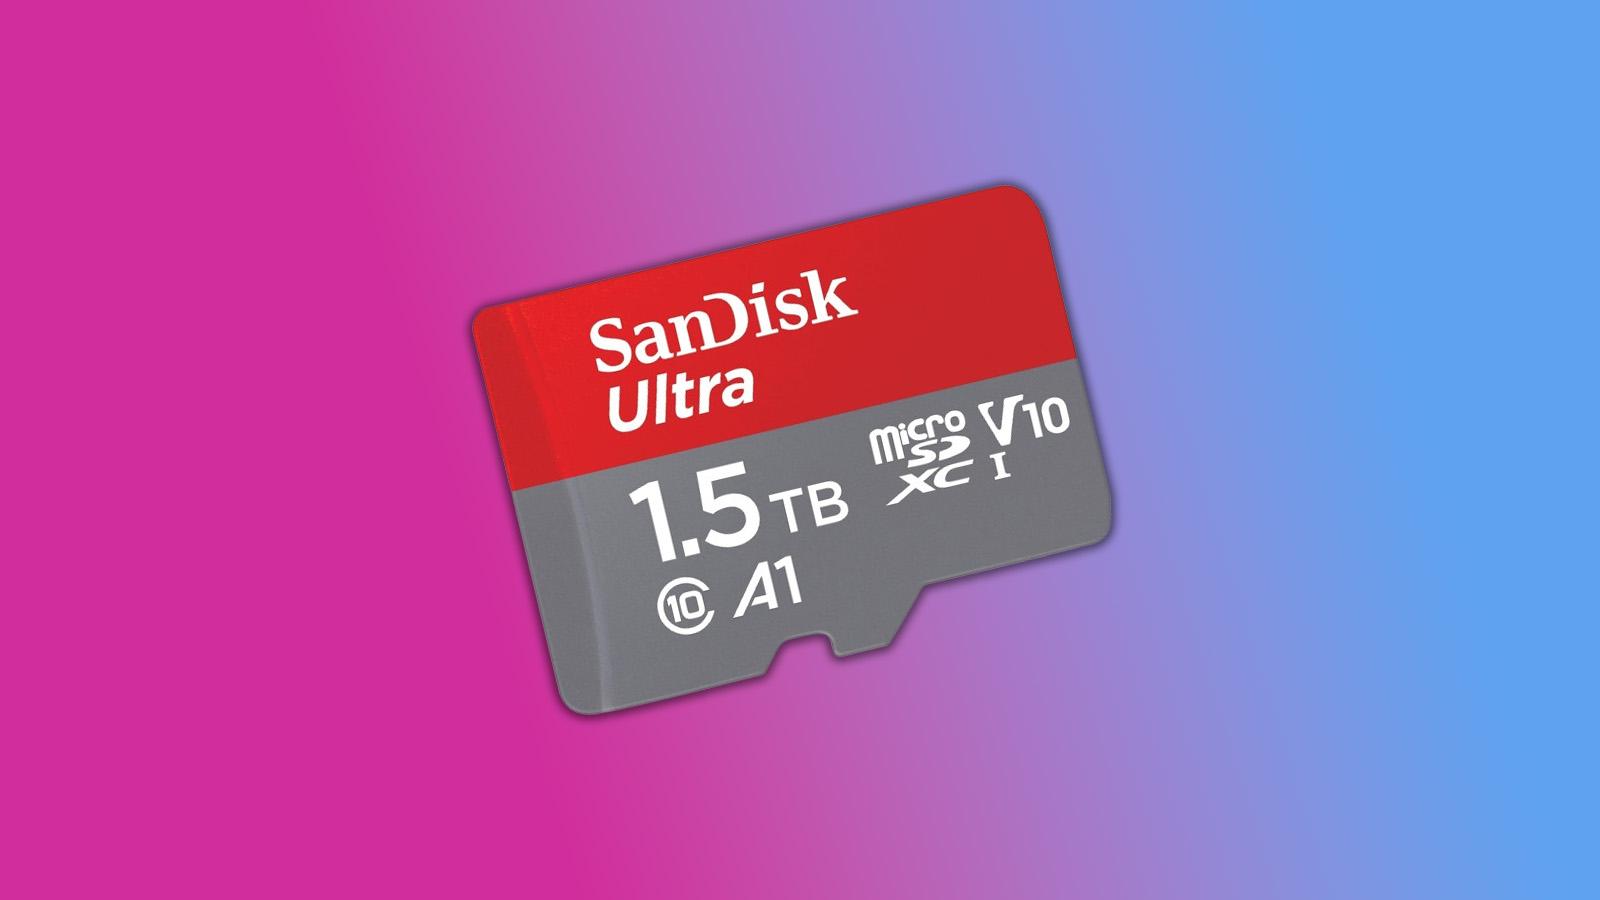 SanDisk 1.5TB MicroSD card pictured on top of a purple and blue gradient